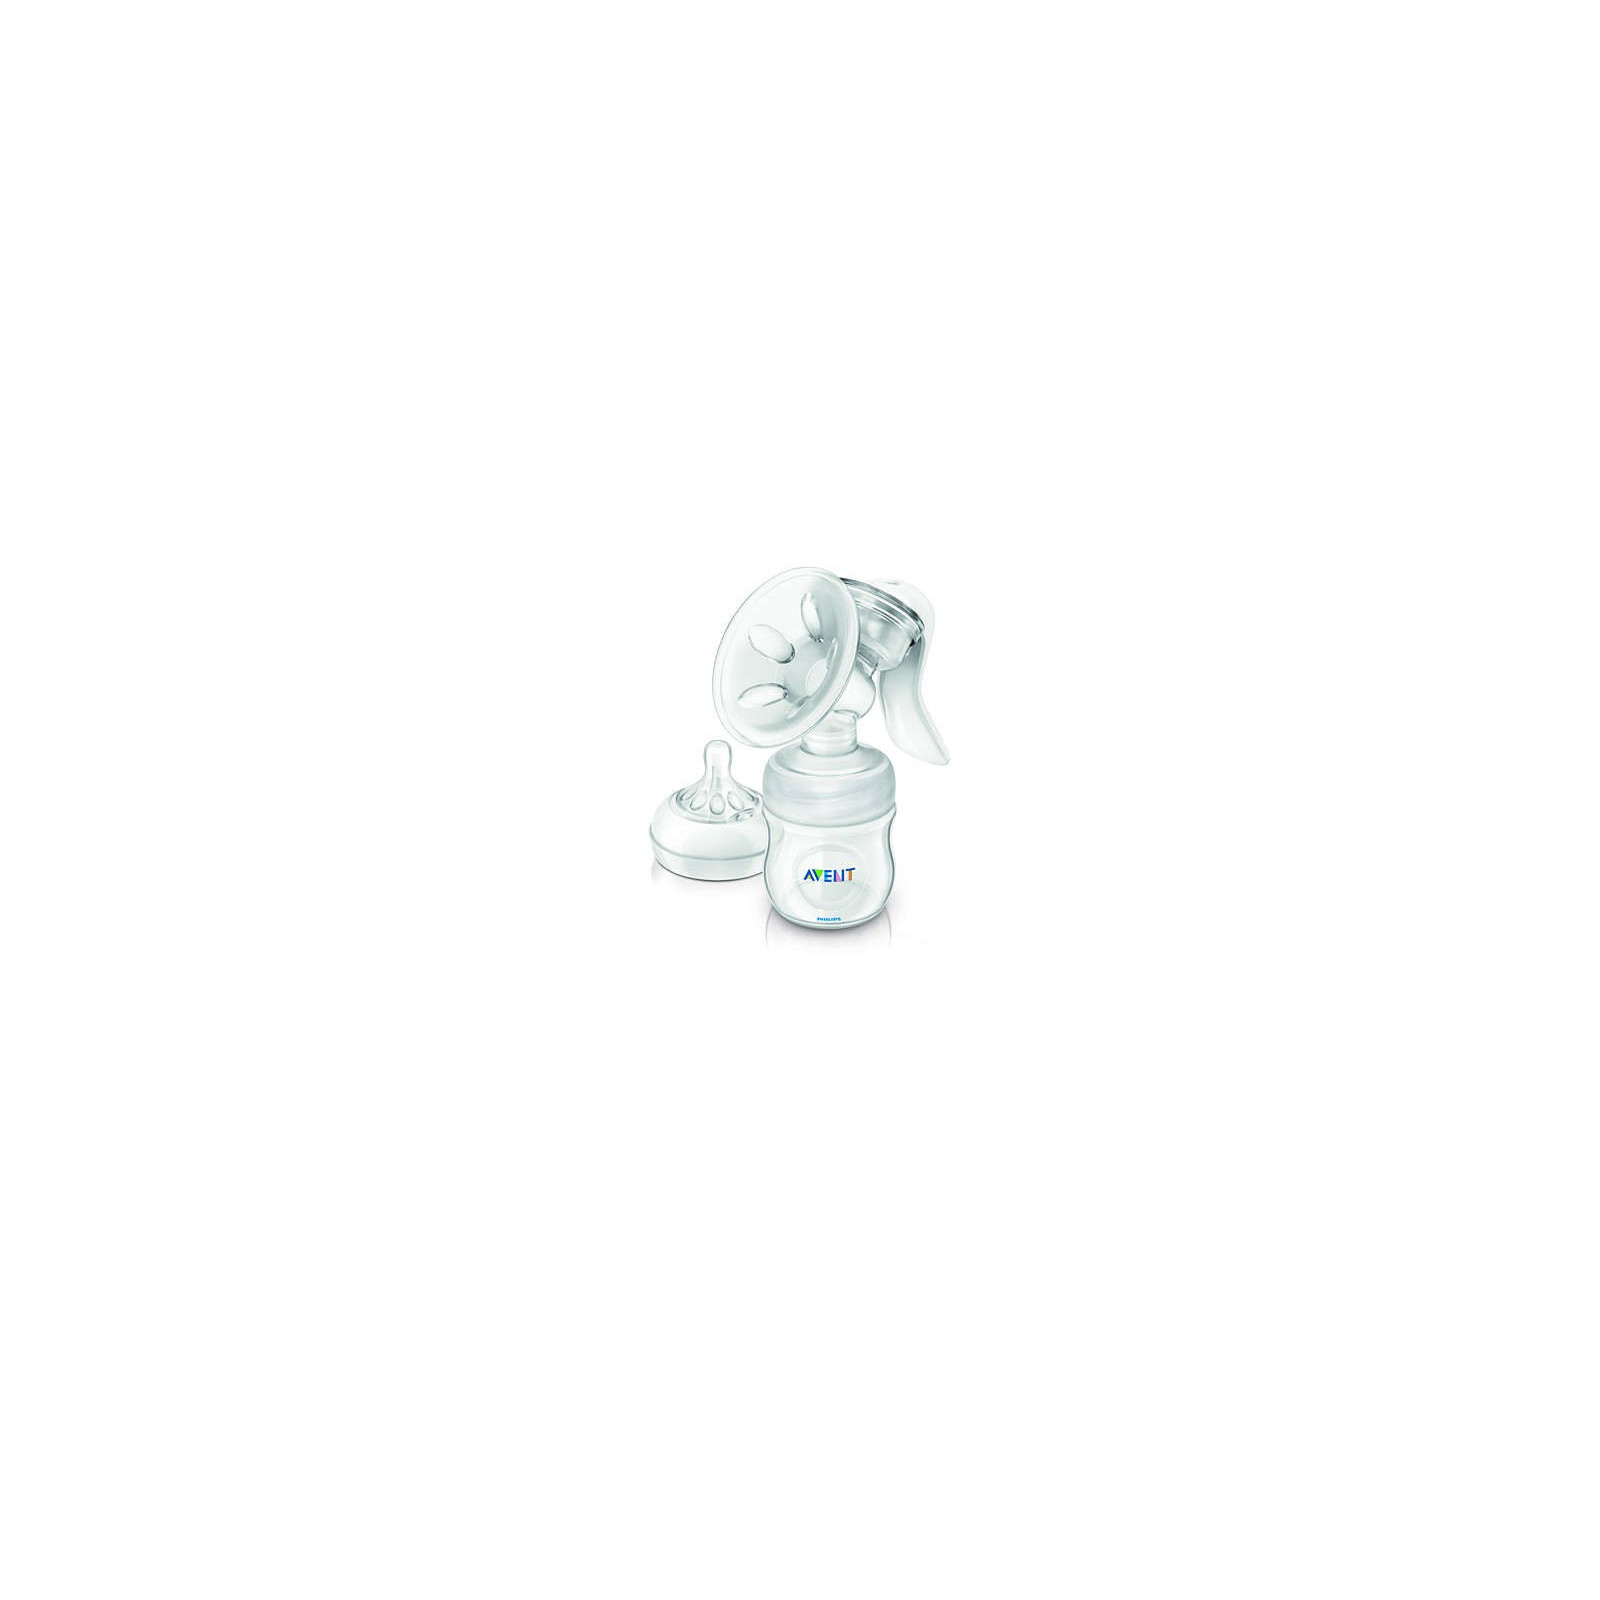 Philips Avent Manual Breast